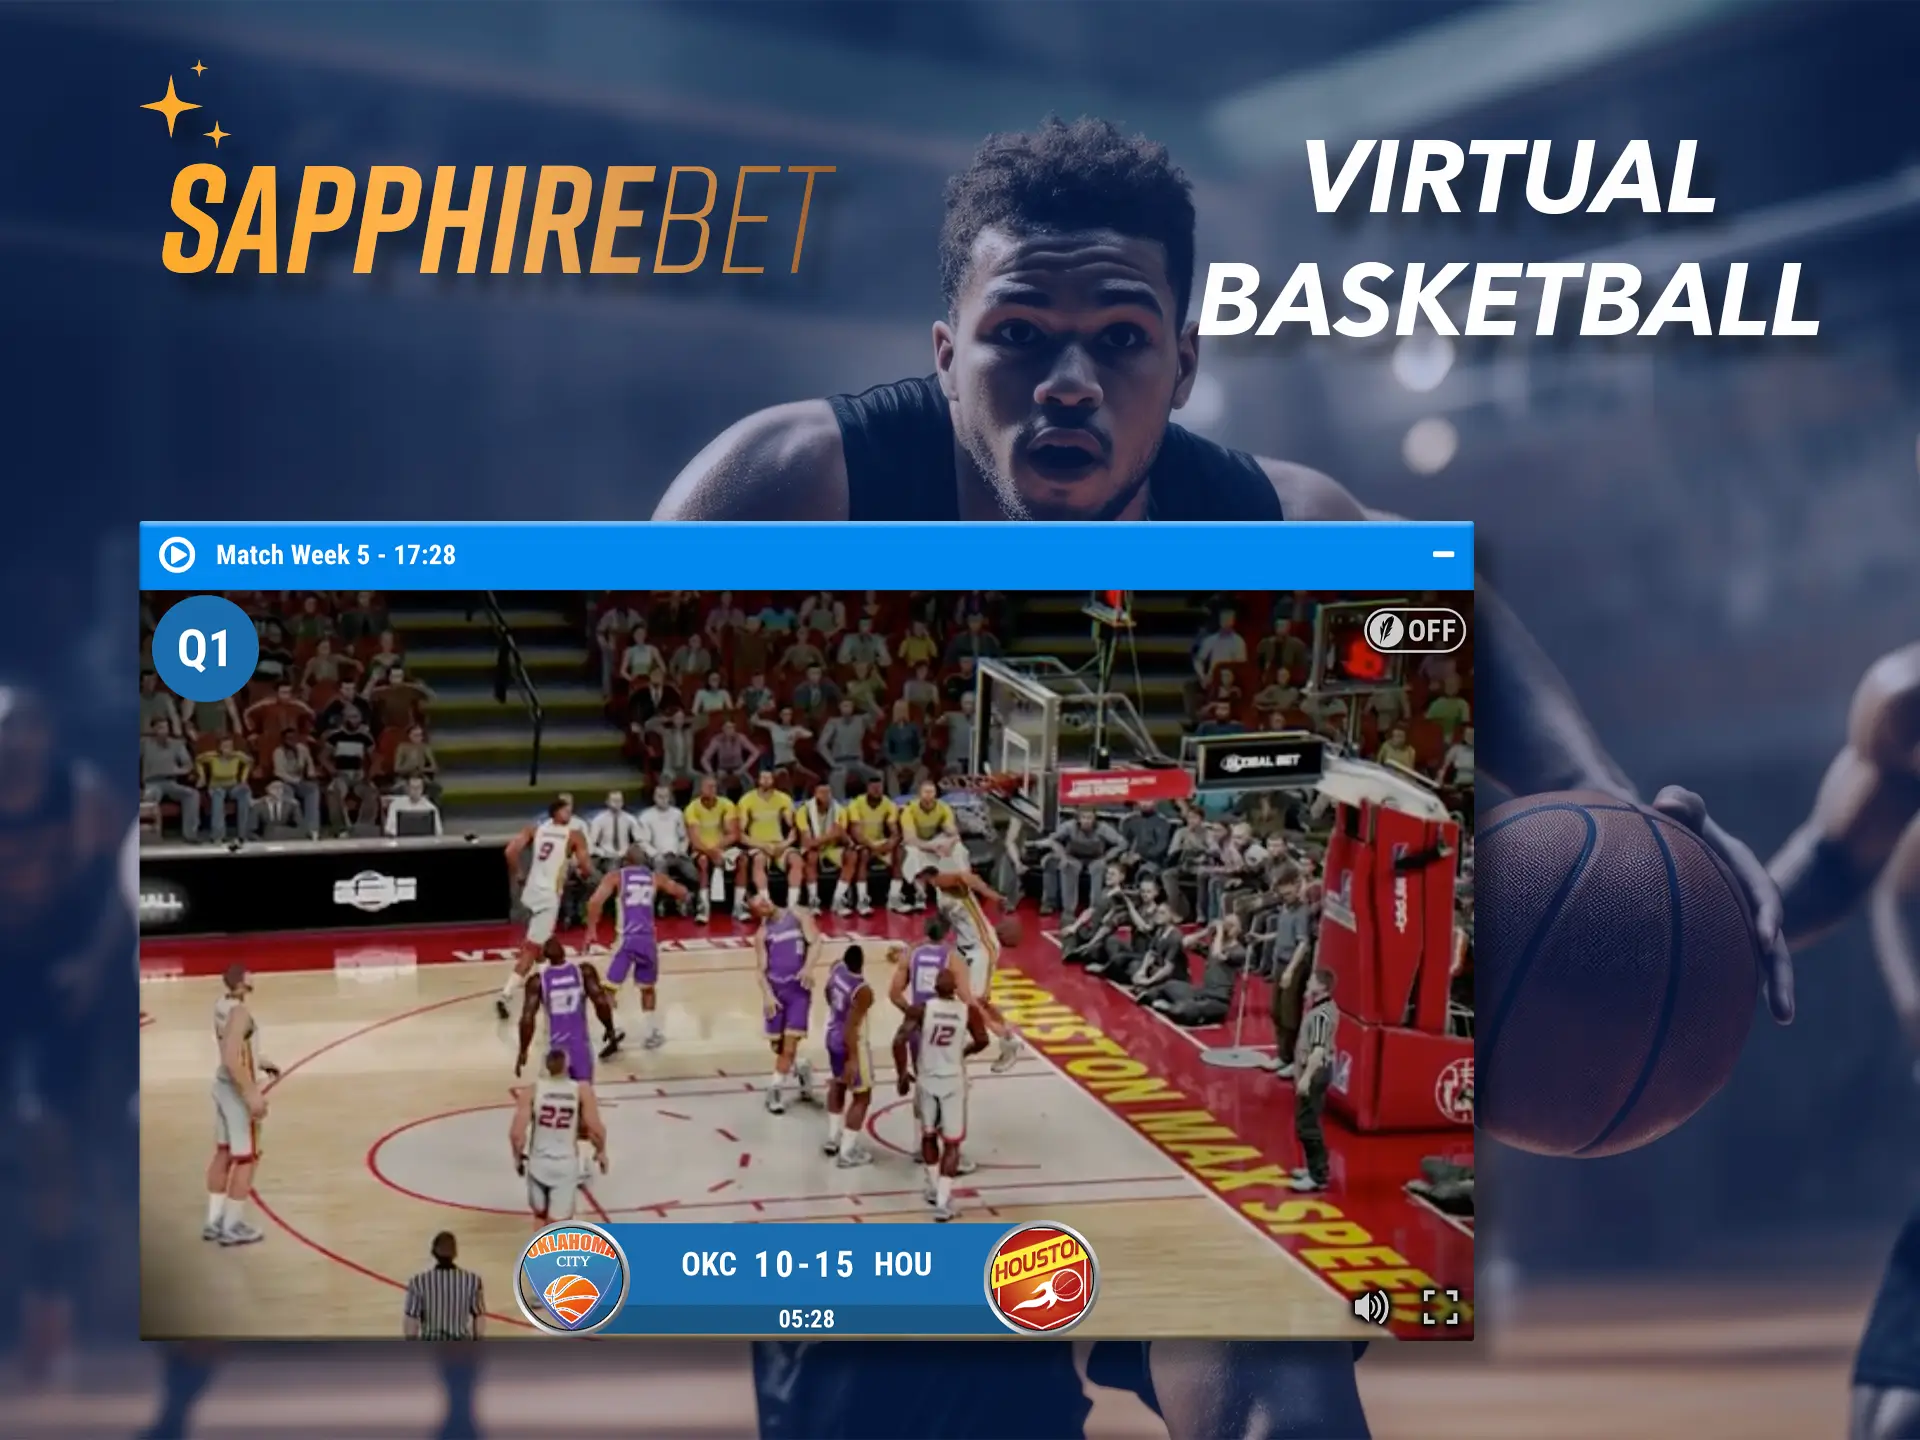 Watch the virtual game of basketball players in make your predictions at Sapphirebet.